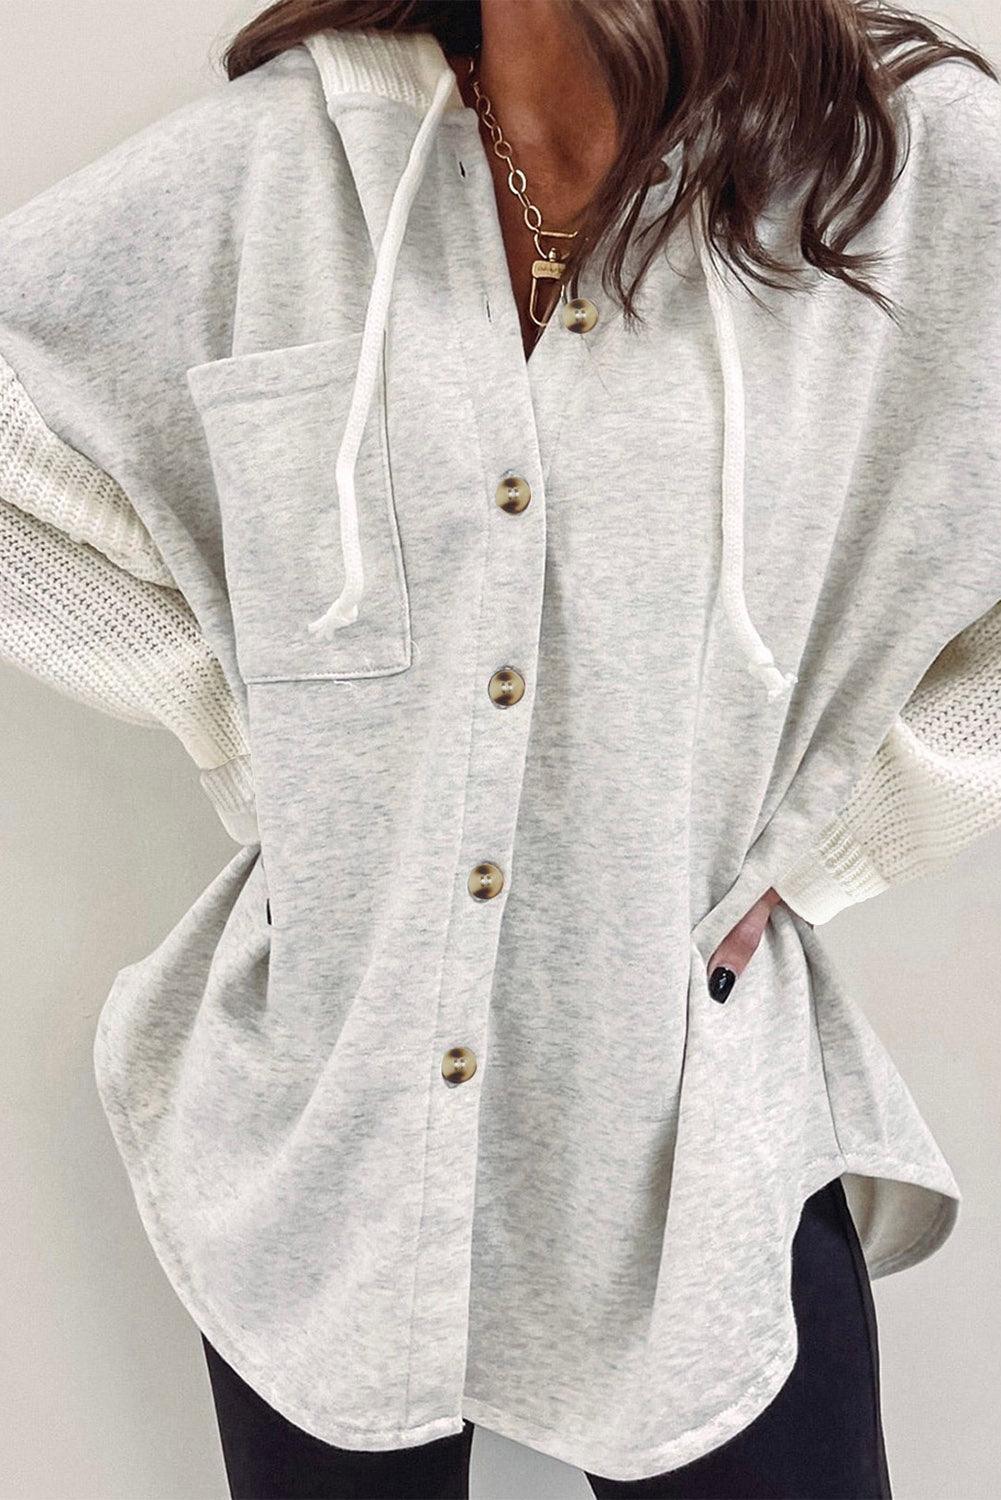 Gray Button Up Contrast Knitted Sleeves Hooded Jacket - Vesteeto